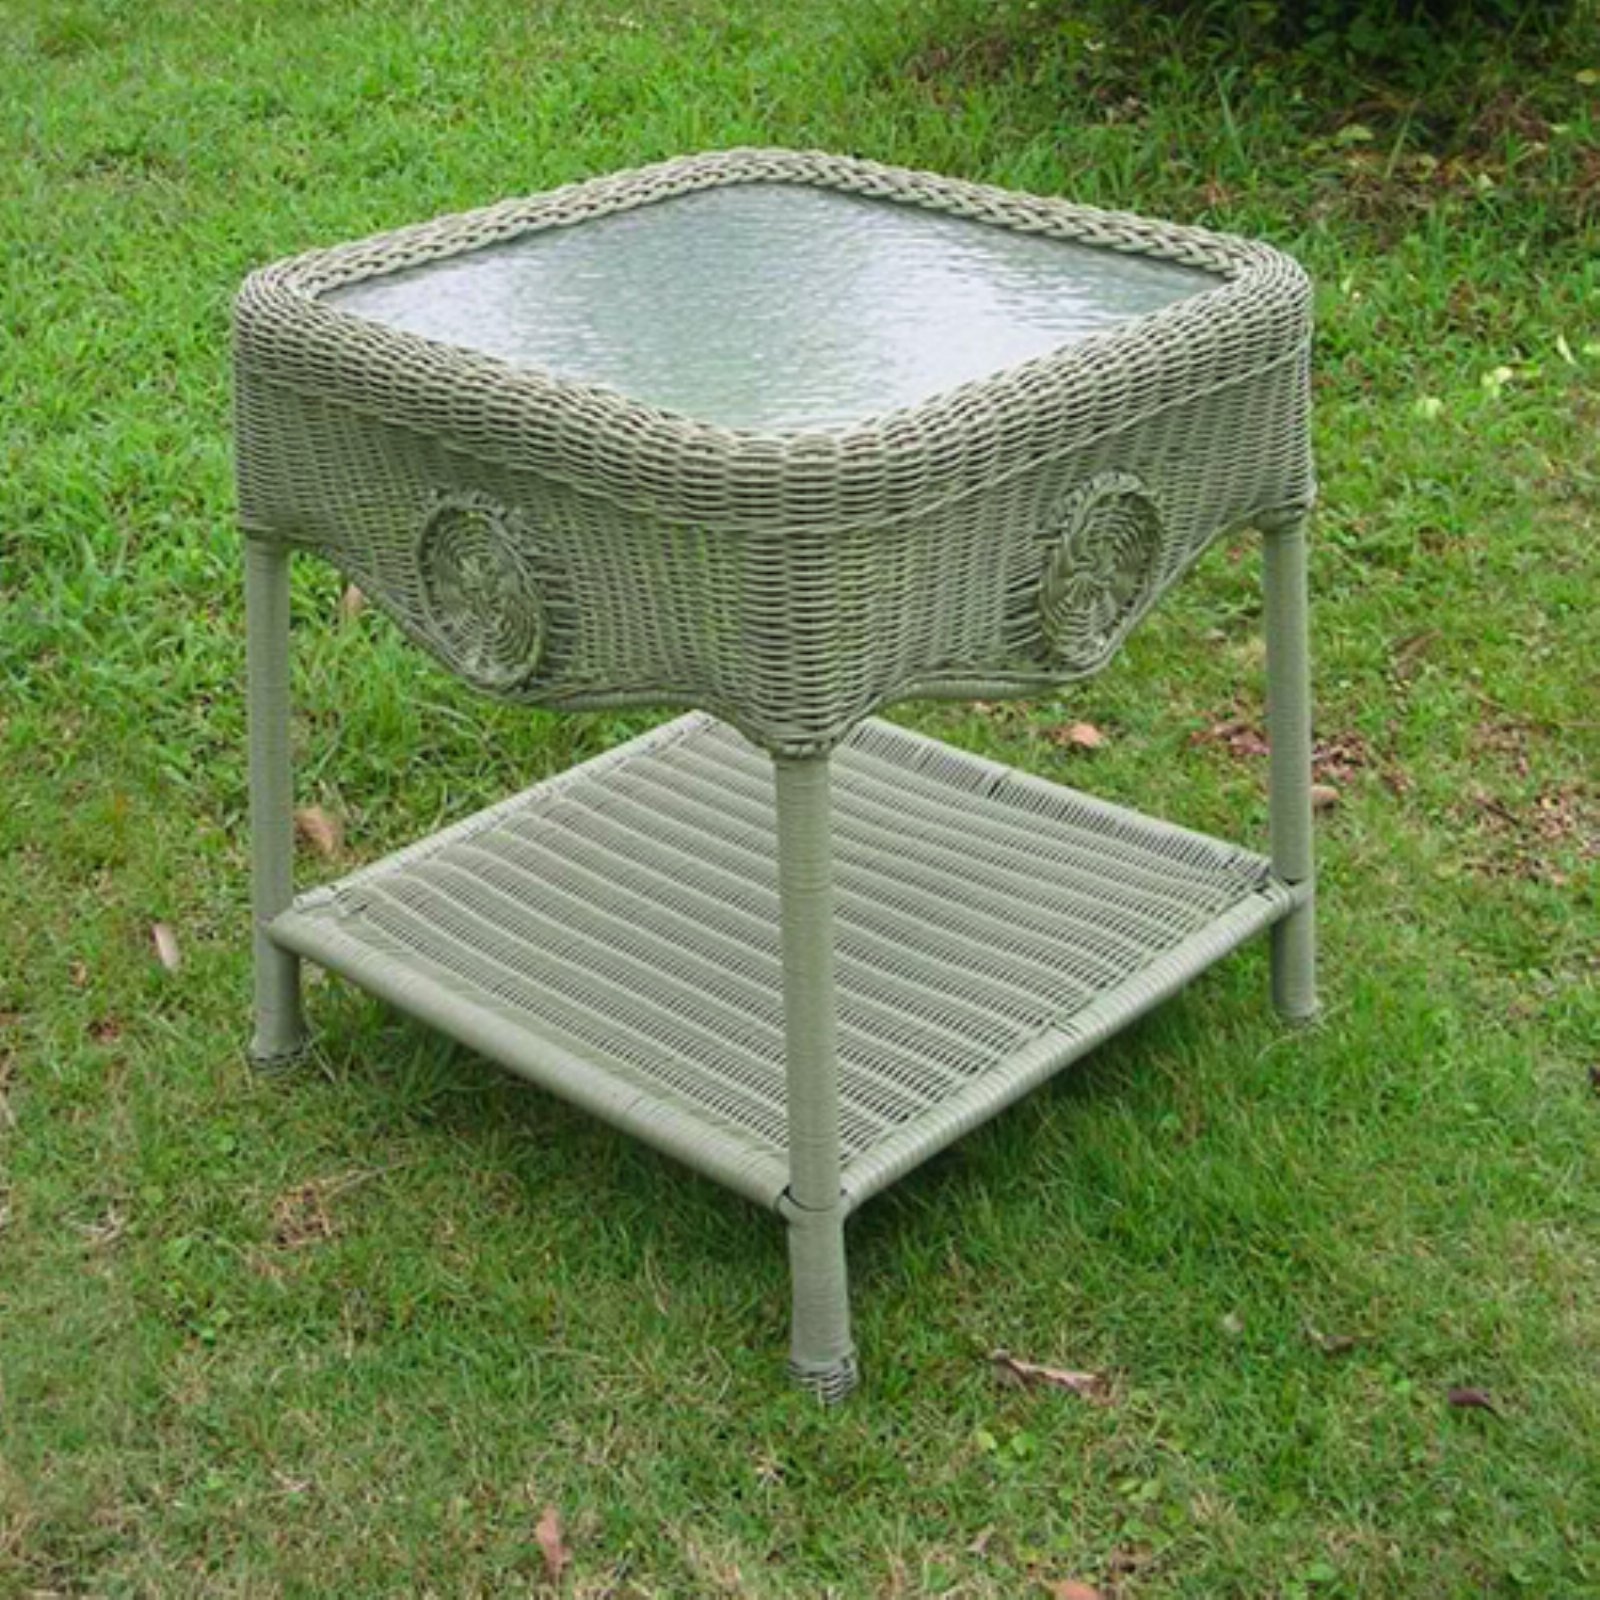 International Caravan Madison Wicker Resin Aluminum Patio Side Table with Glass - image 1 of 7